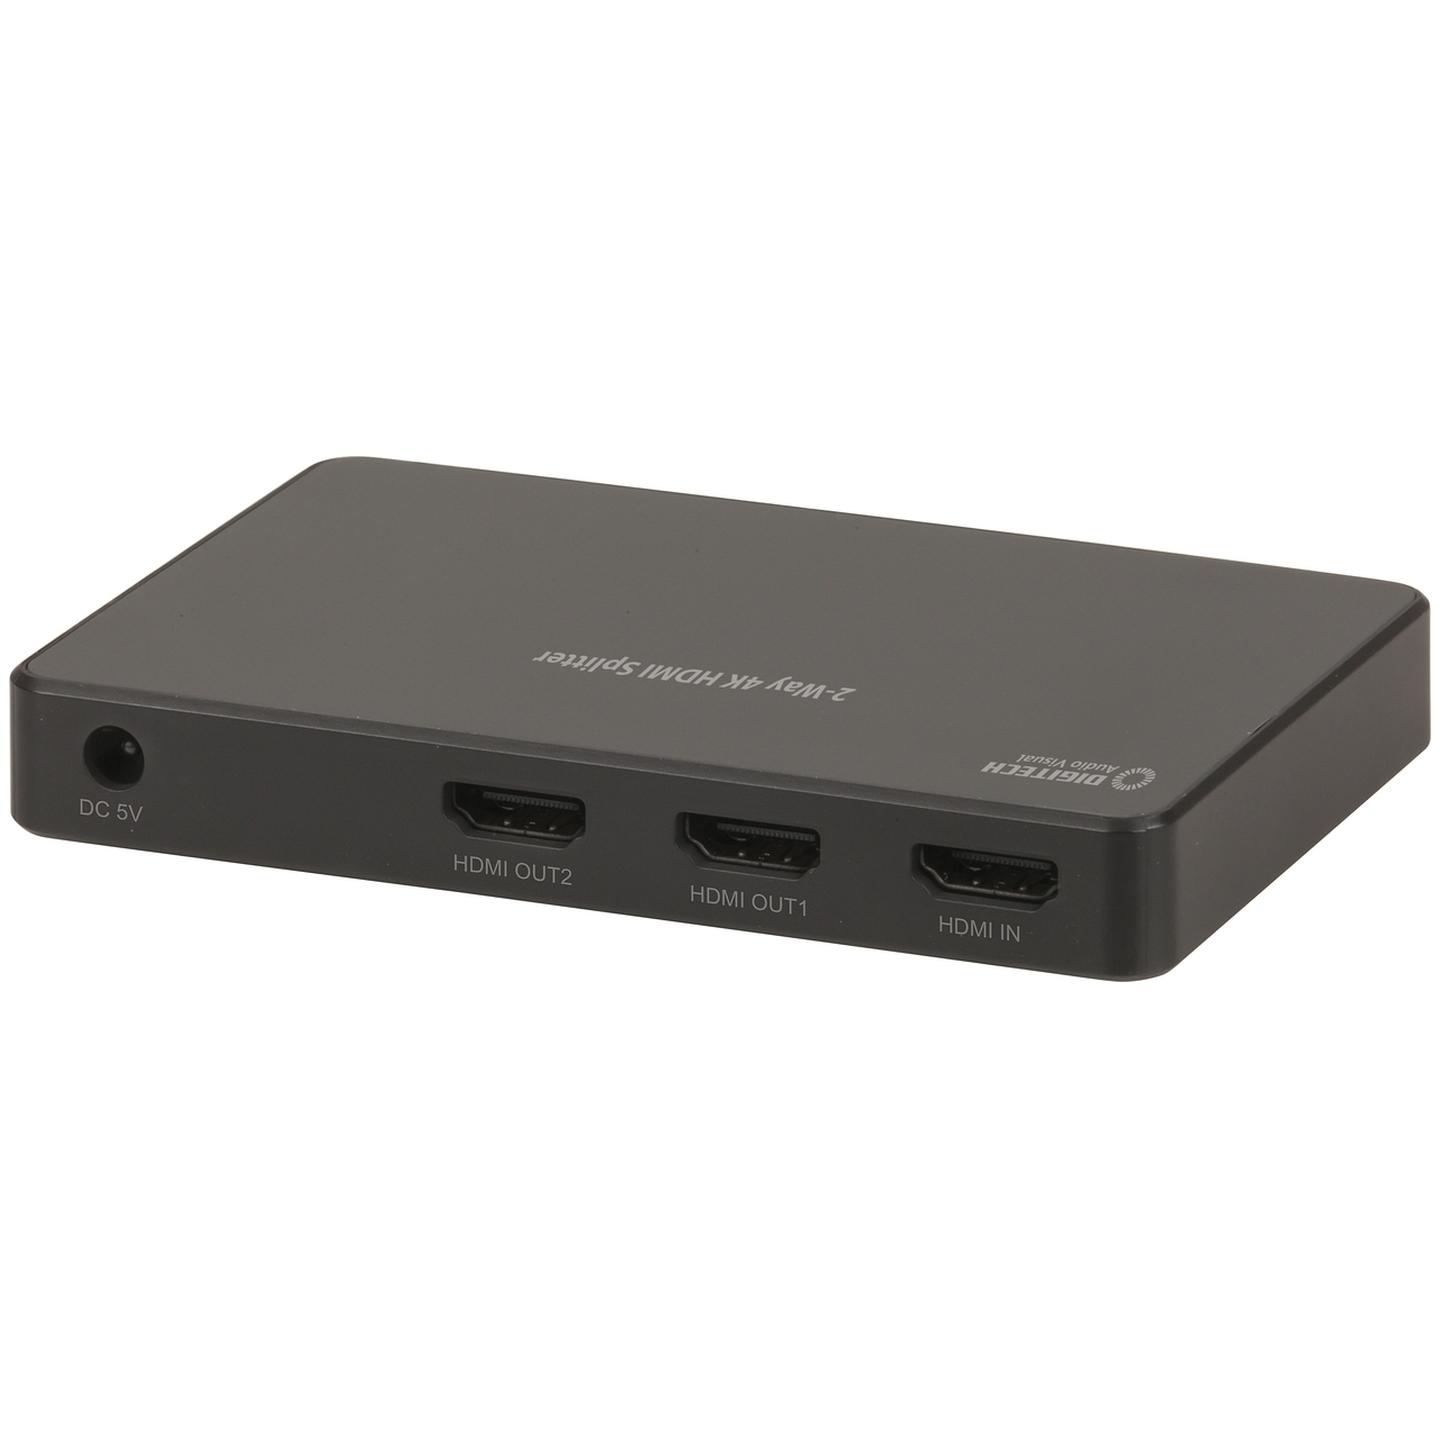 2-Way HDMI Splitter with 4K UHD and HDR Support